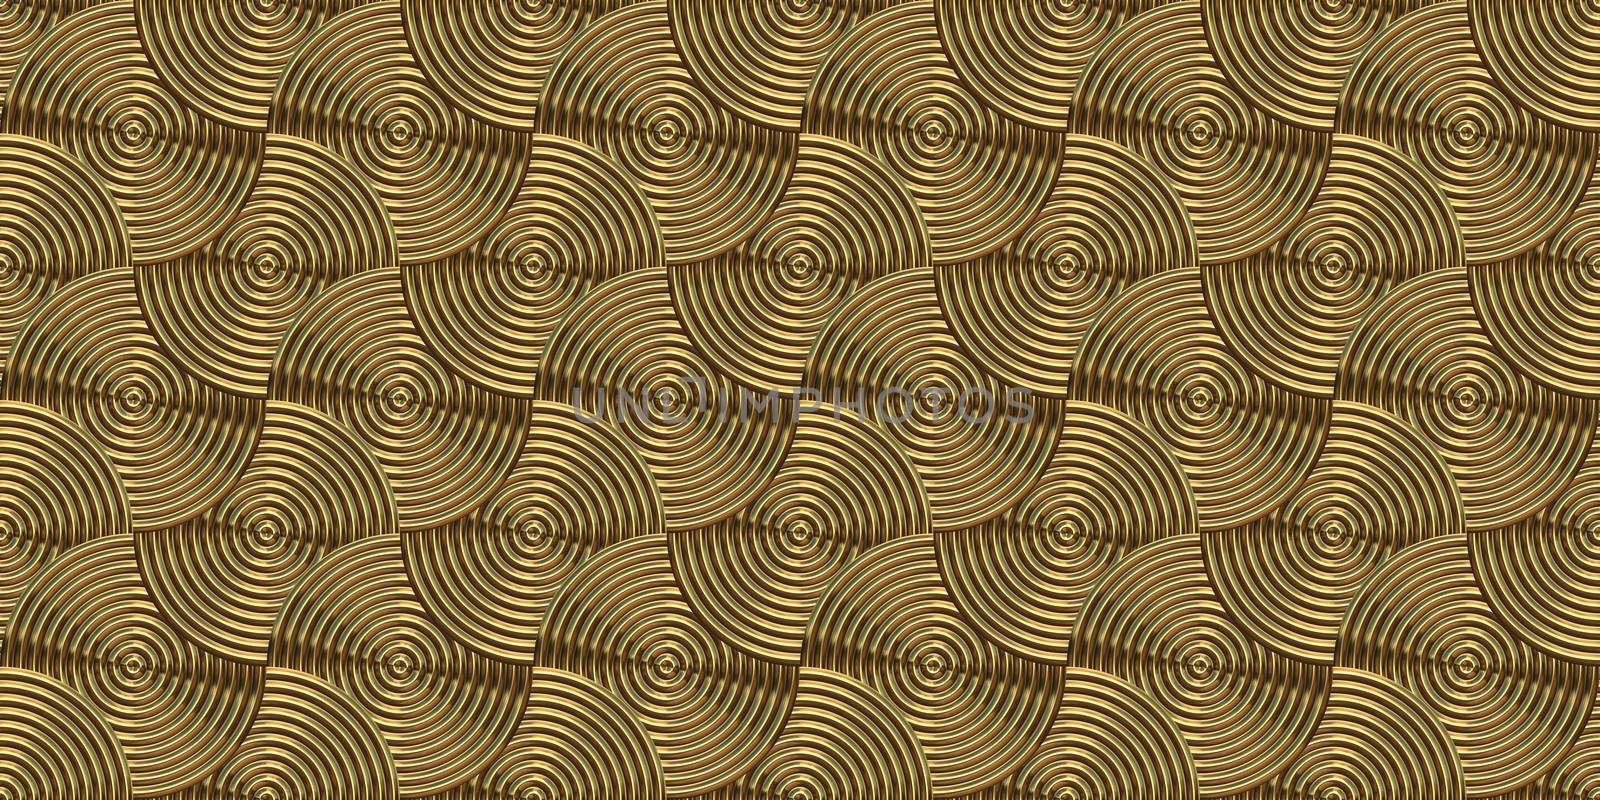 Gold art deco seamless texture. Vintage rings background. Metal circles pattern.